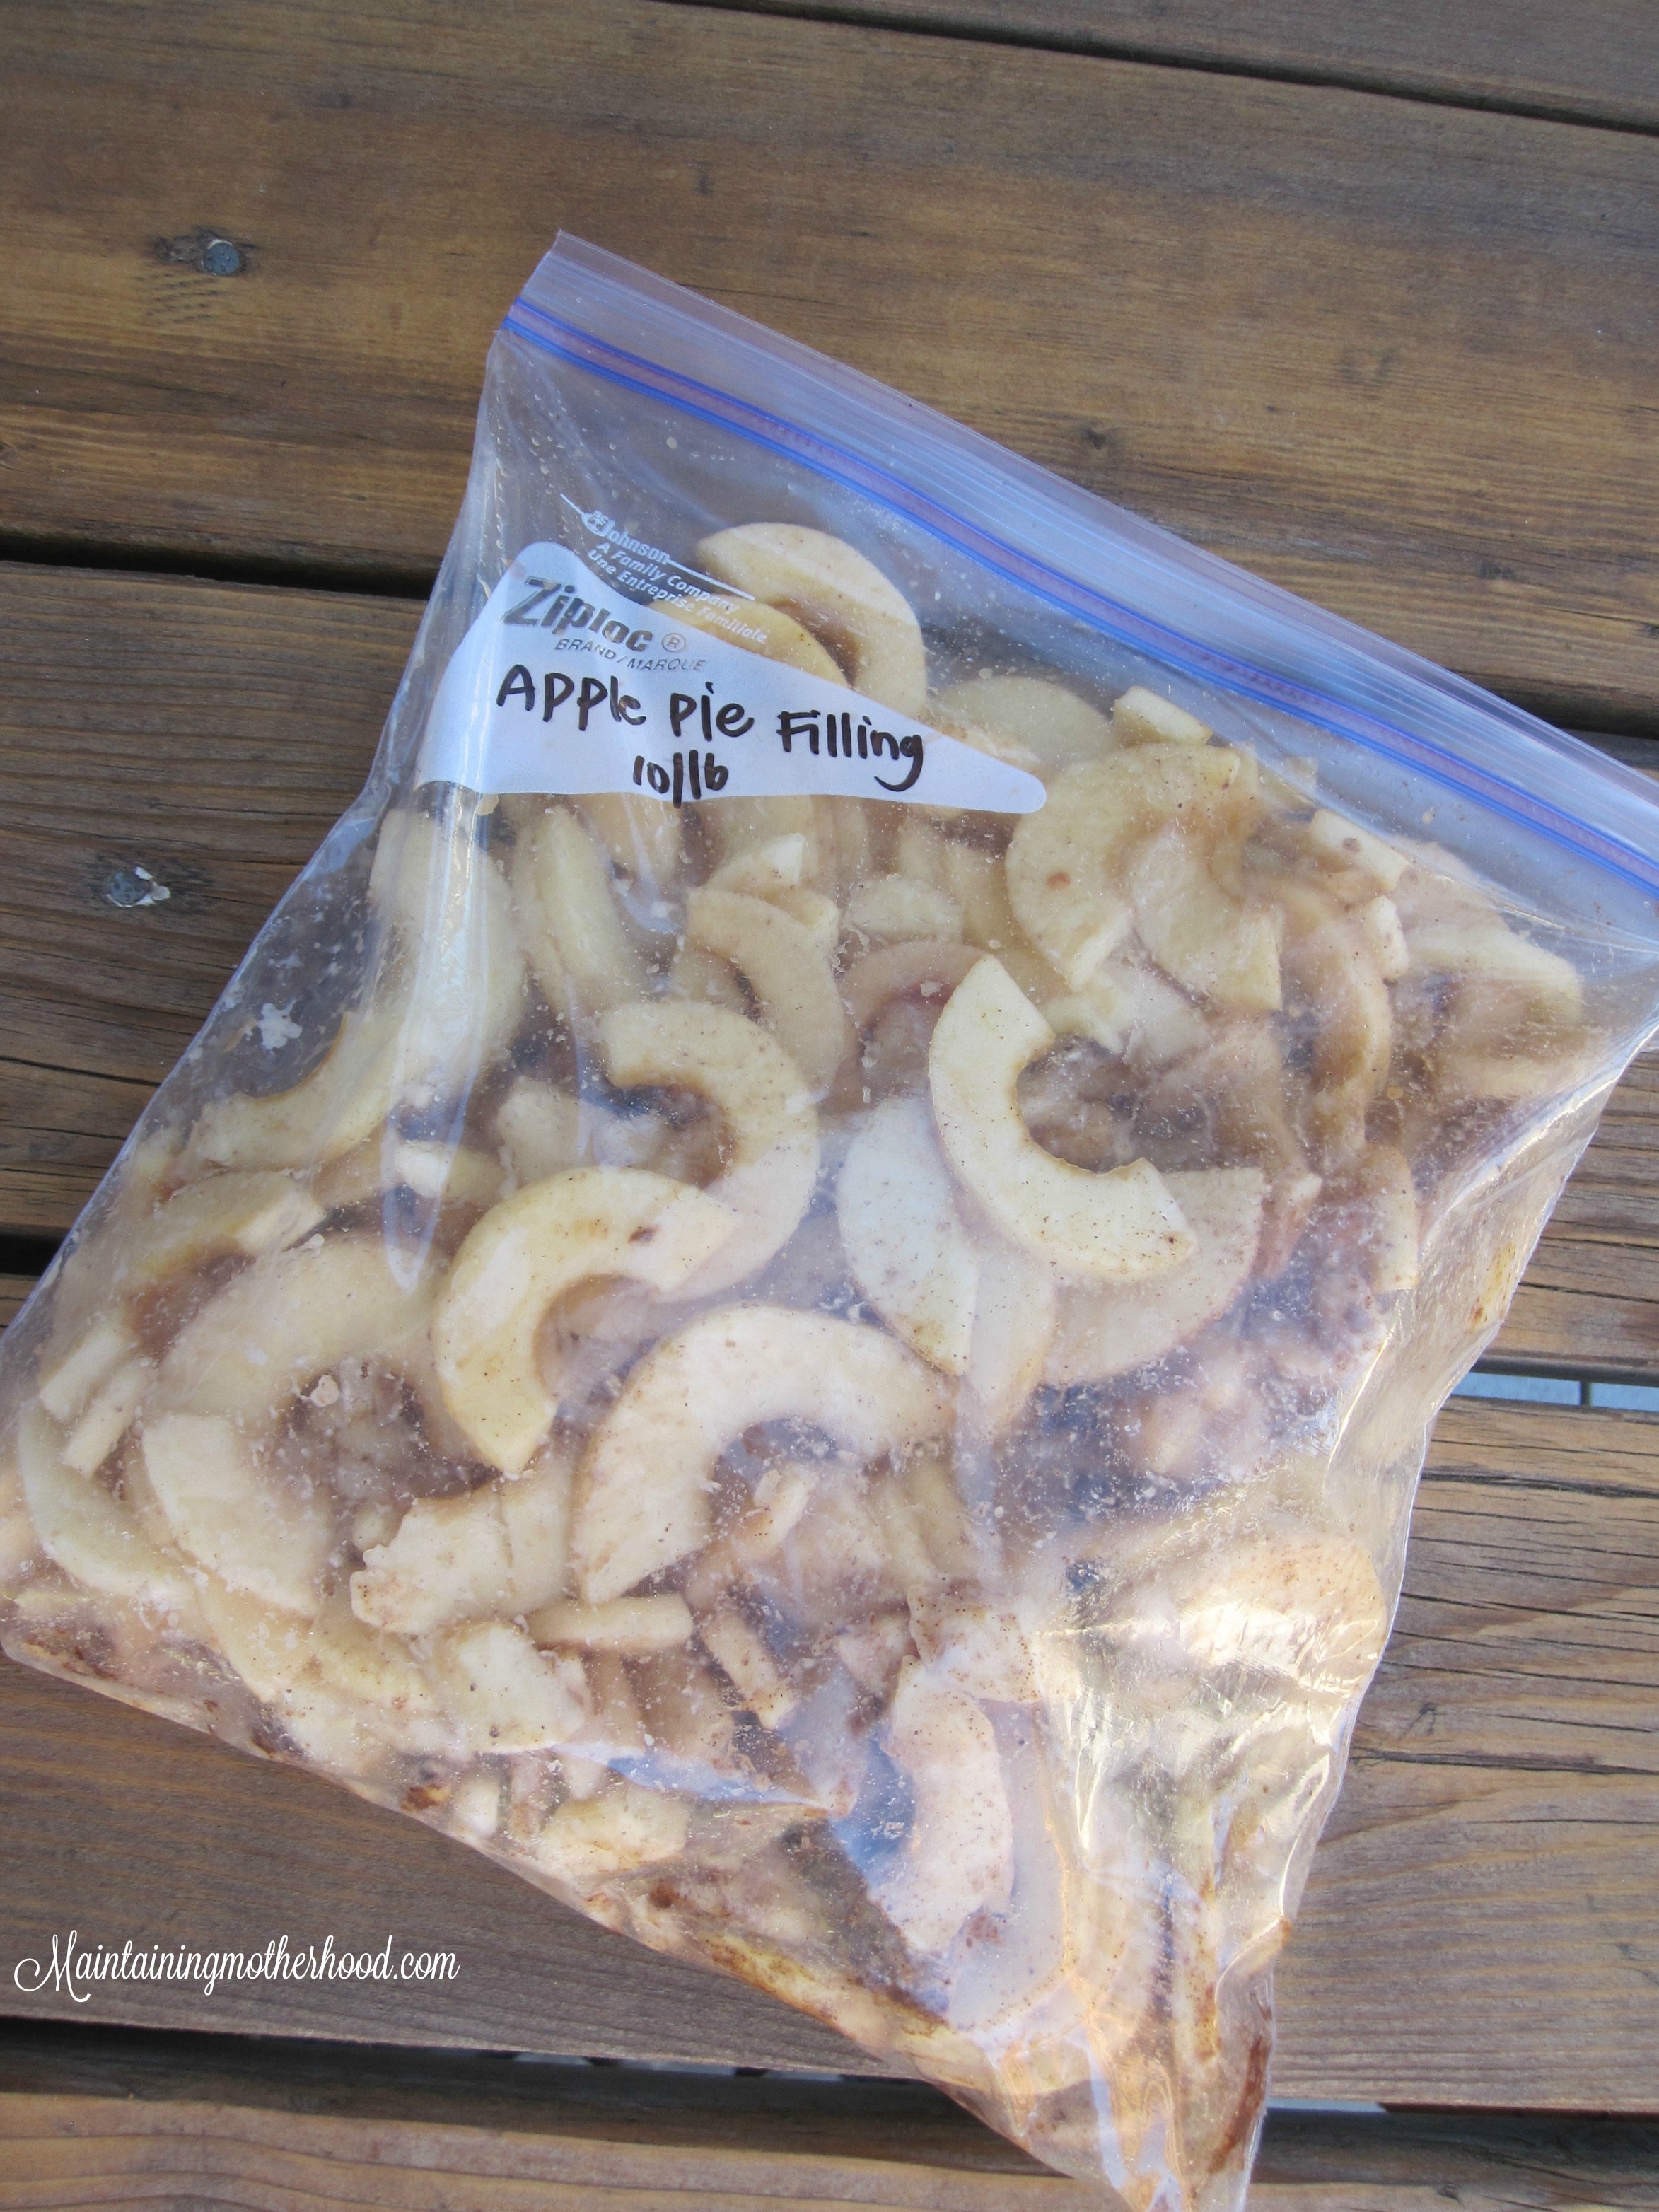 If you are looking to prepare apple pie in advance for the holidays, here's a simple way to whip up apple pie filling in bulk and always have it on hand!